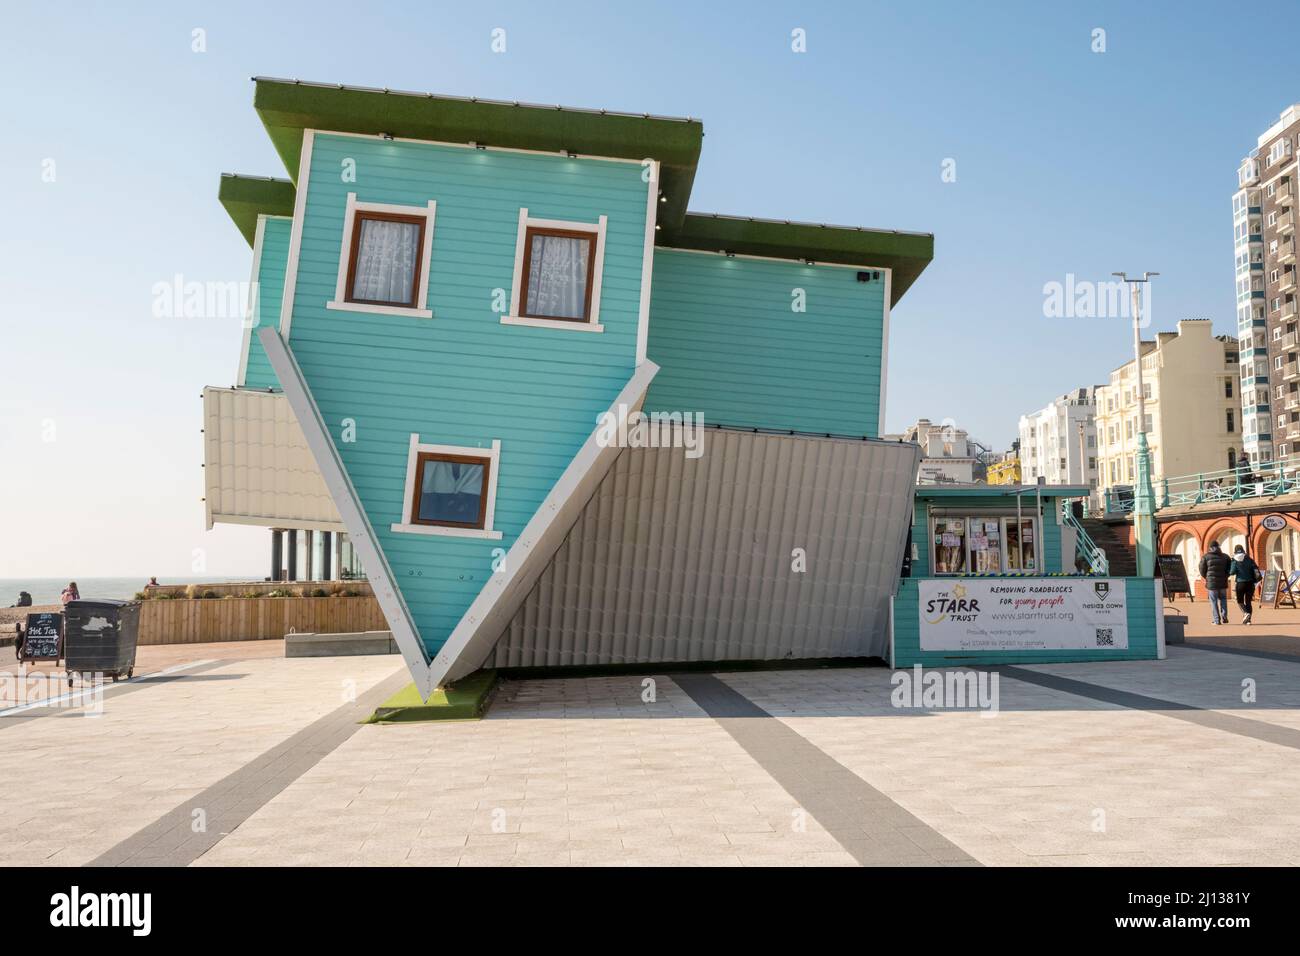 The Upside Down House in Brighton. Stock Photo